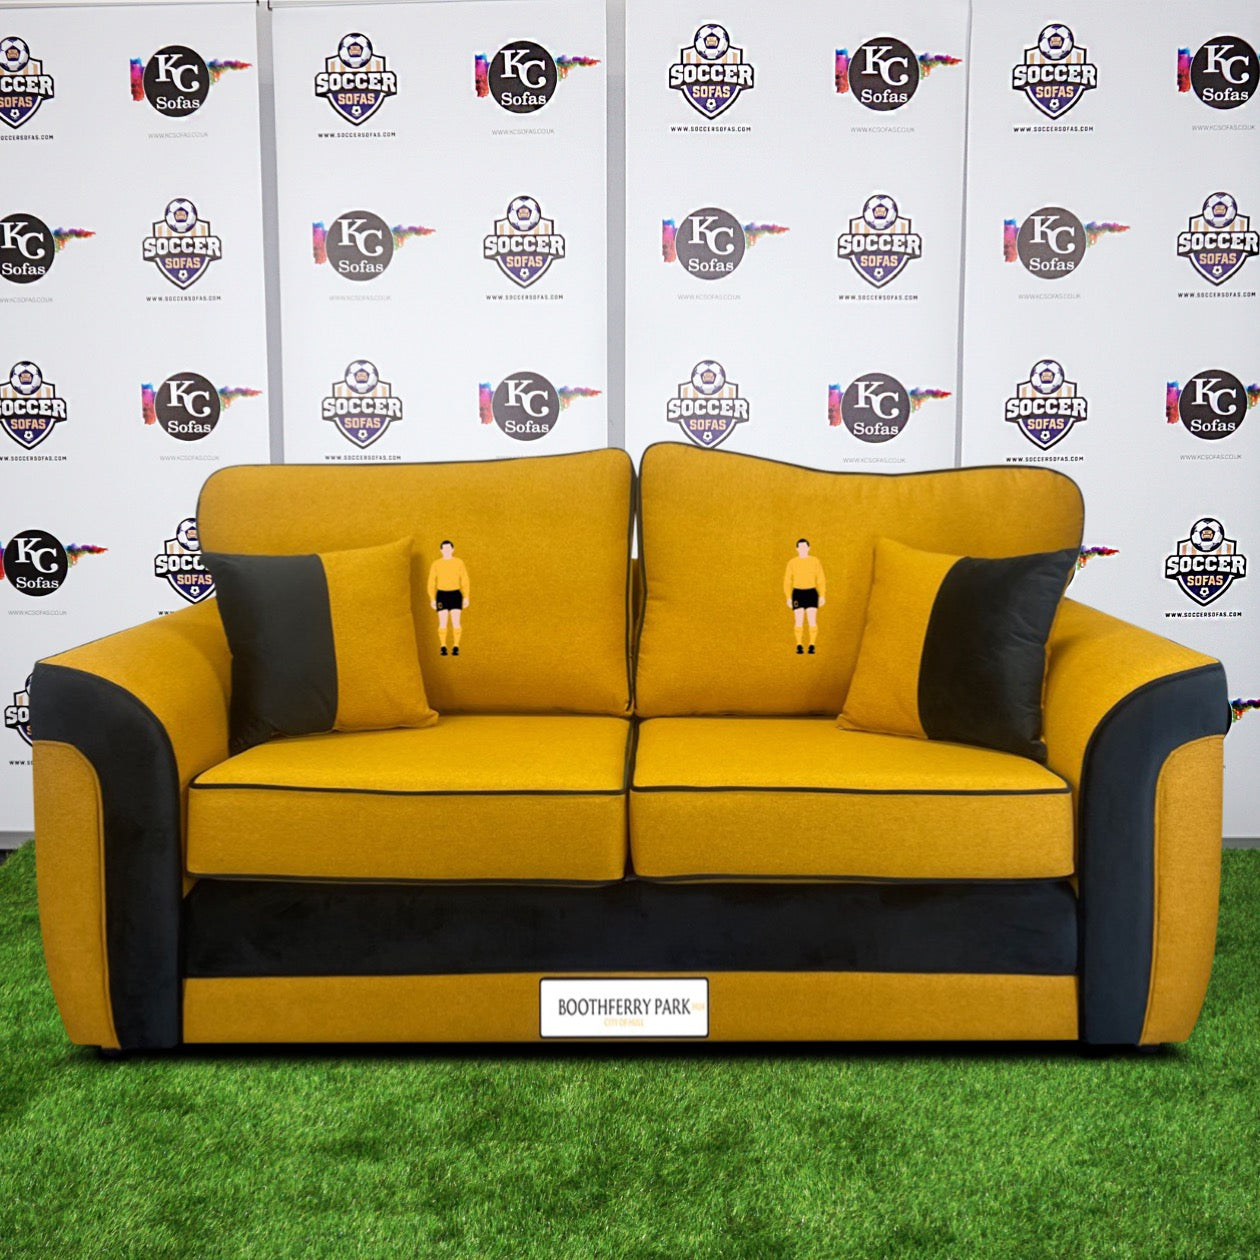 Boothferry Park 3 Seater Sofa (Hull FC)